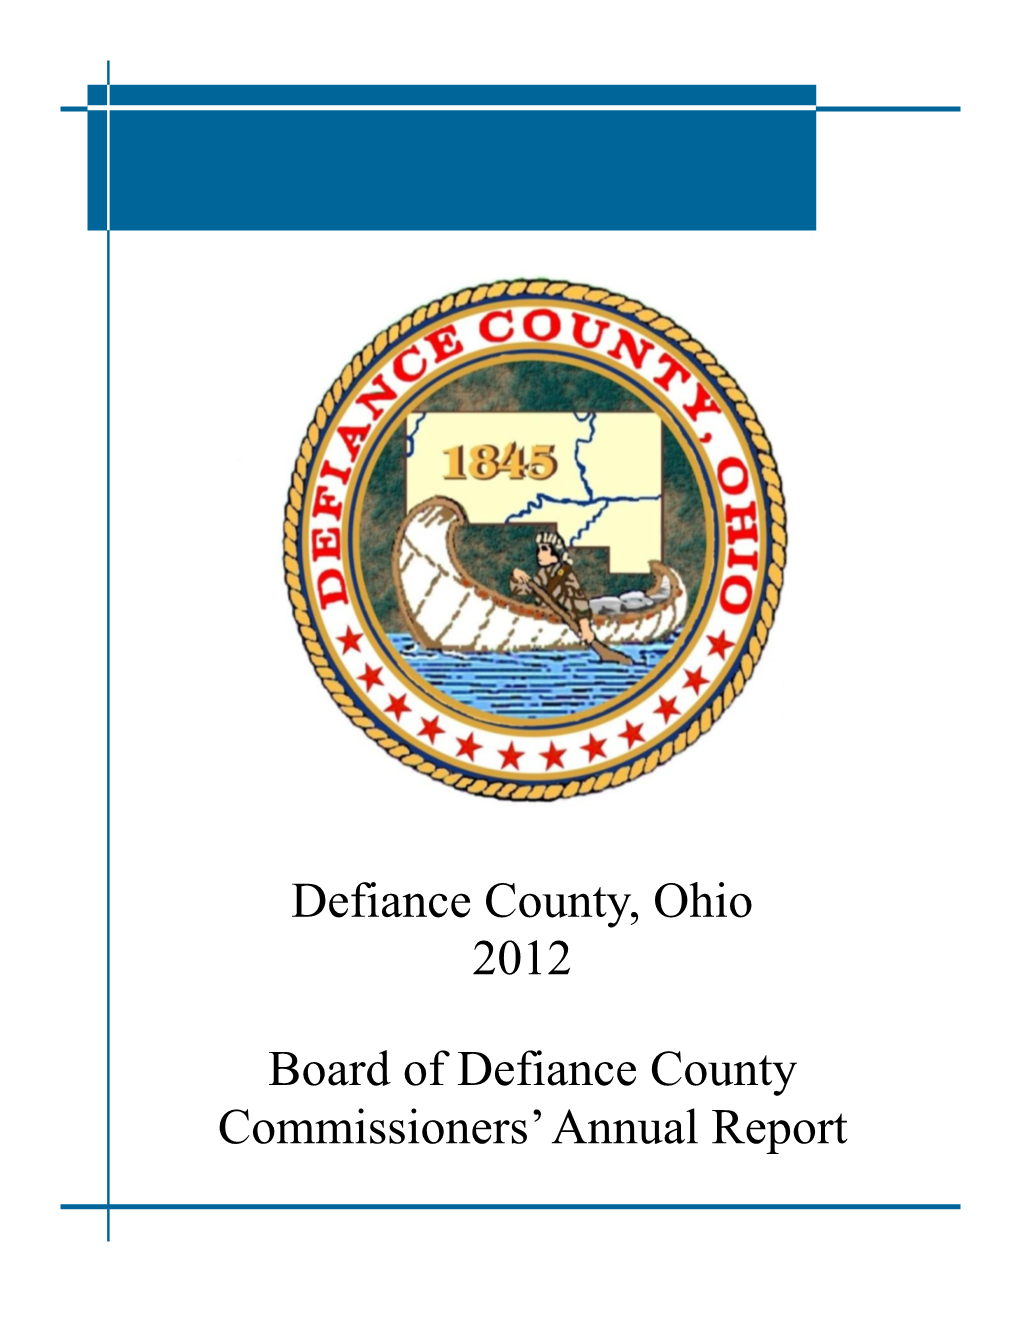 Defiance County, Ohio 2012 Board of Defiance County Commissioners' Annual Report